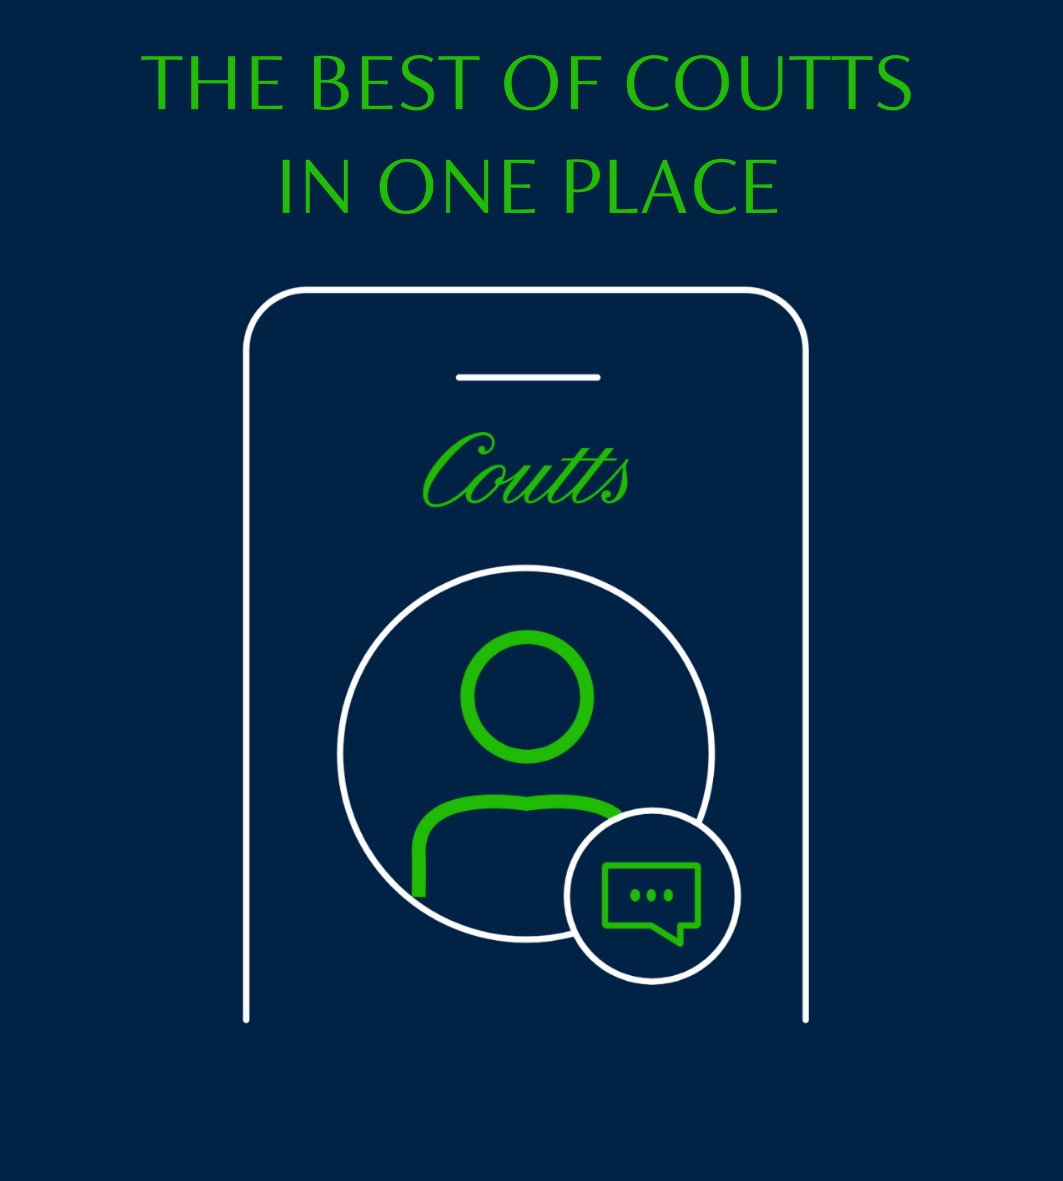 The Best of Coutts